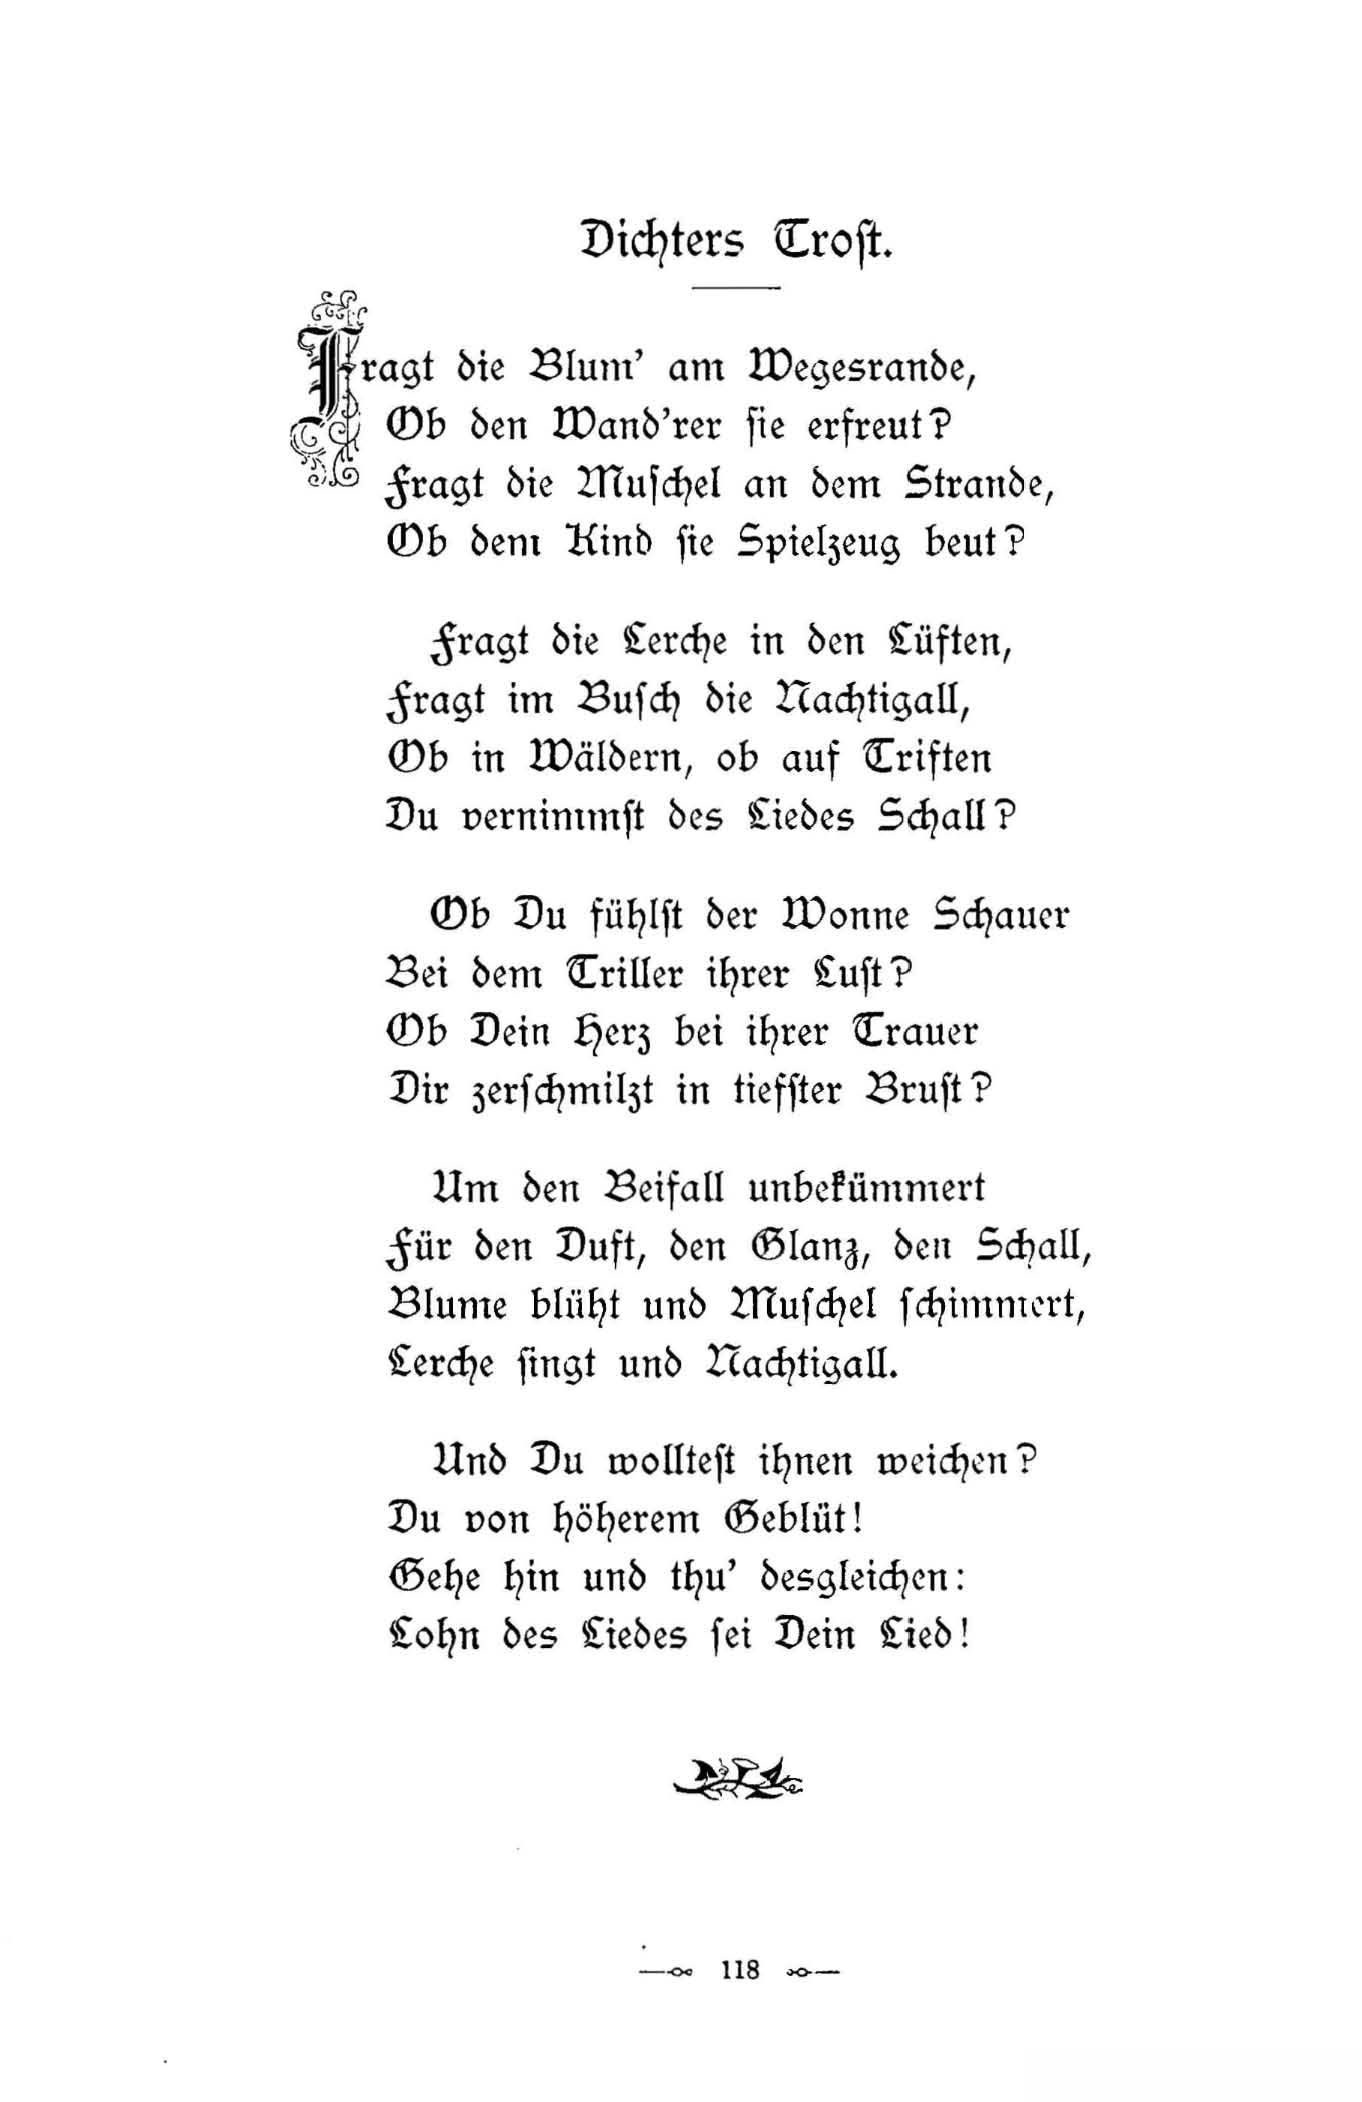 Dichters Trost (1896) | 1. (118) Main body of text